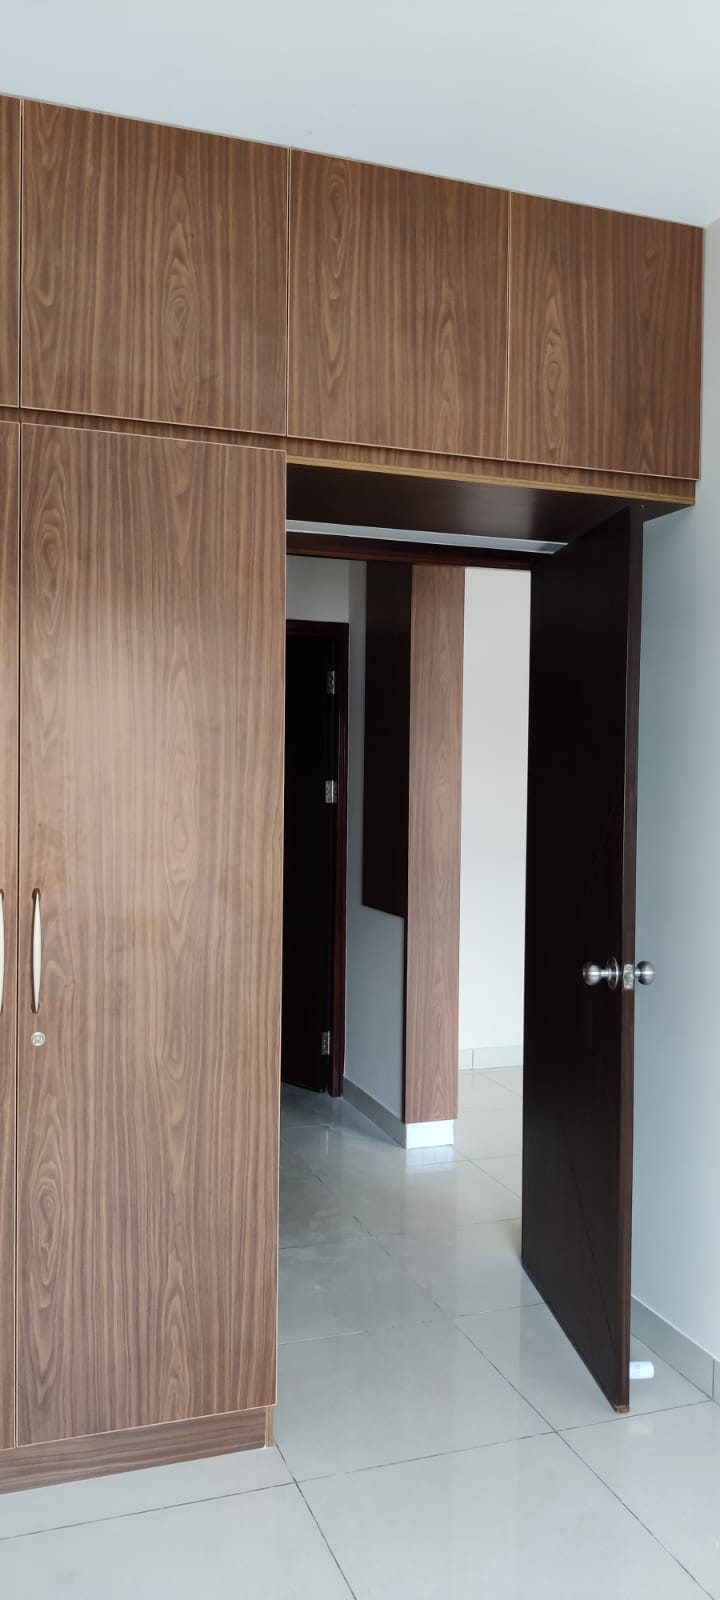 3 BHK Residential Apartment for Lease Only at JAML2 - 3309 in JP Nagar Layouts